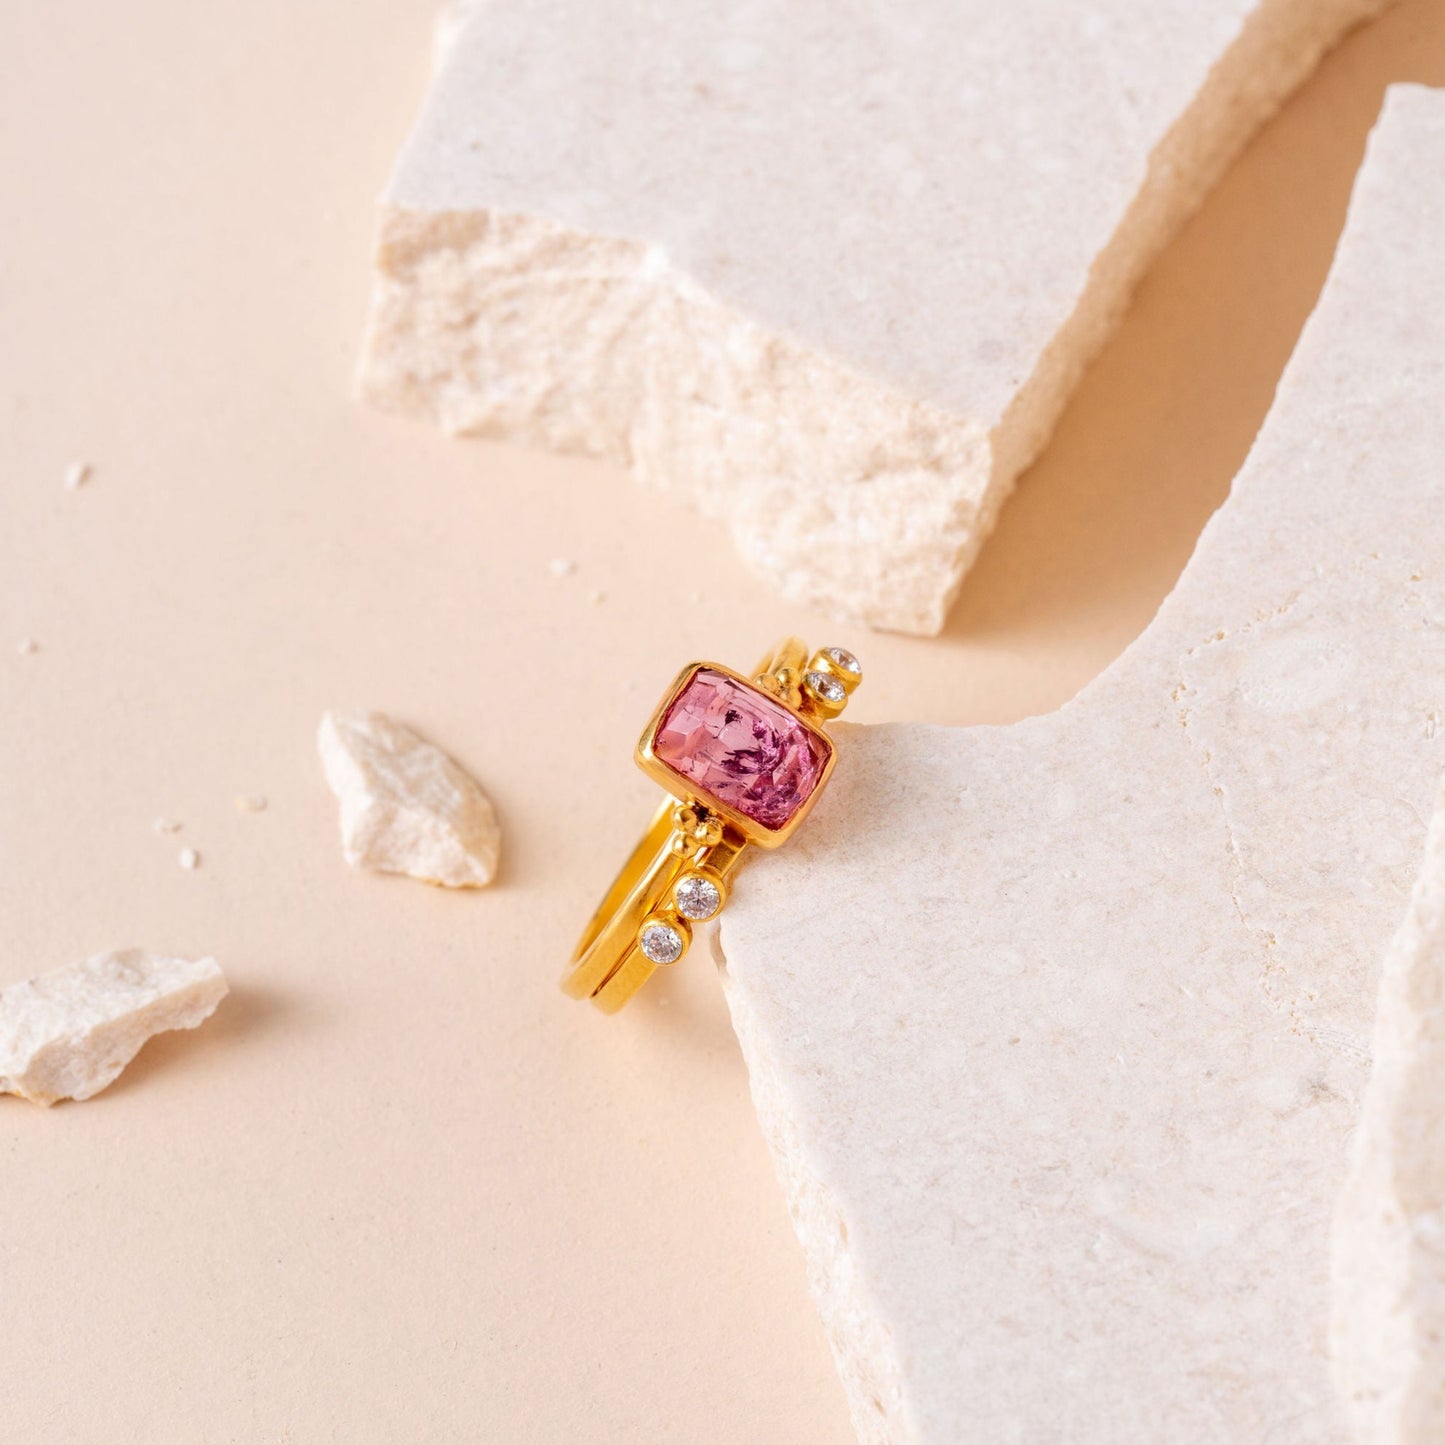 Handcrafted gold ring adorned with an exquisite pink tourmaline and fine granulation detailing.